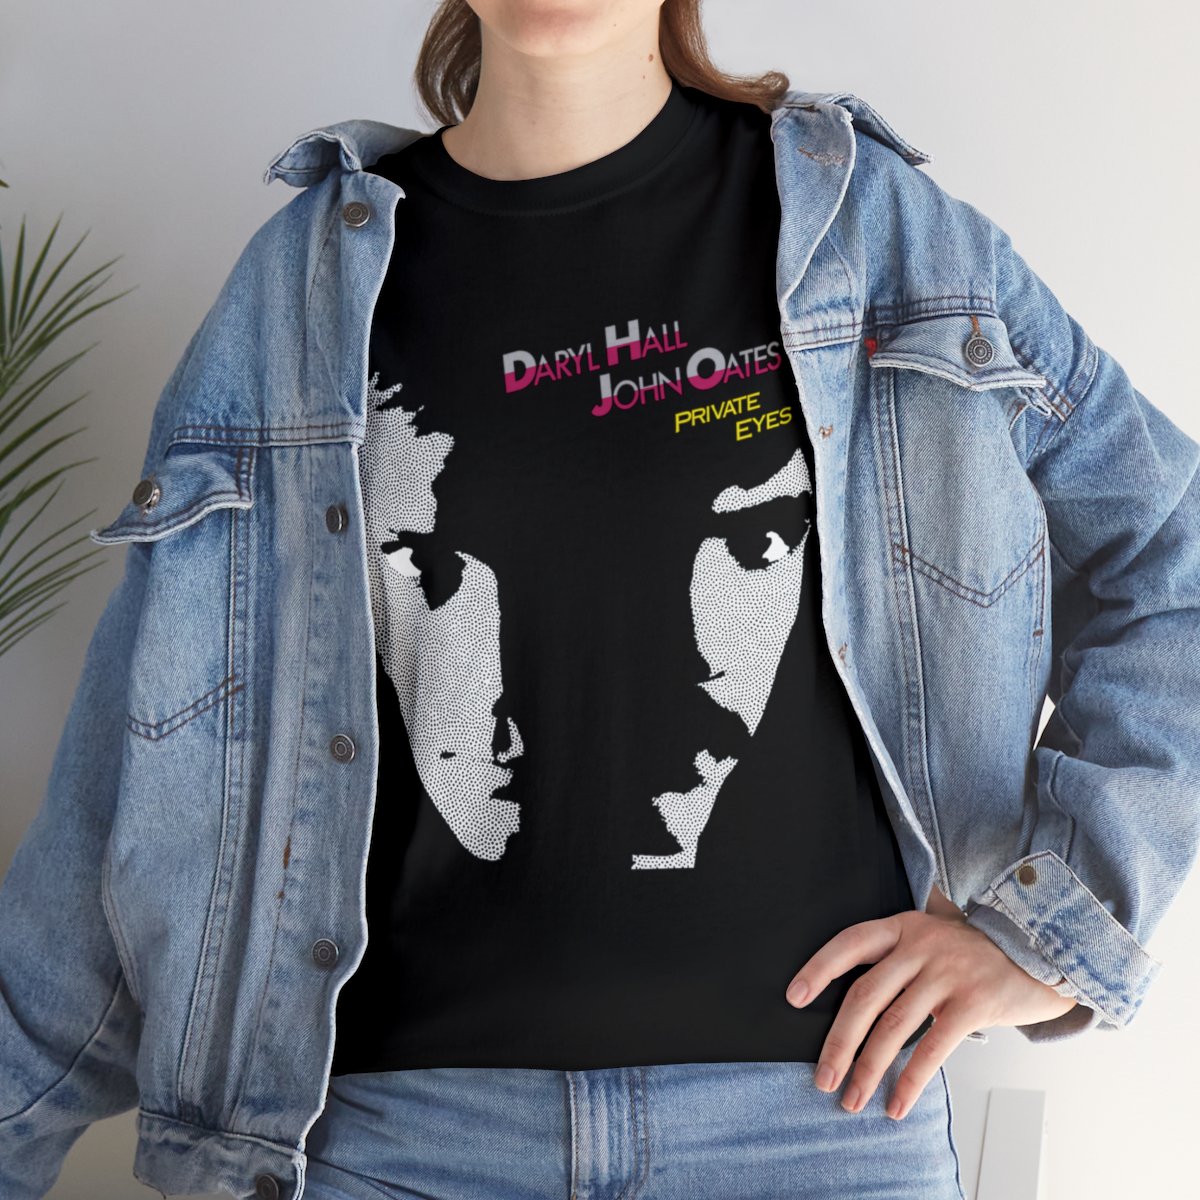 HALL and OATES daryl hall john oates 80s retro vintage style Graphic tee T-Shirt Unisex Heavy Cotton Tee